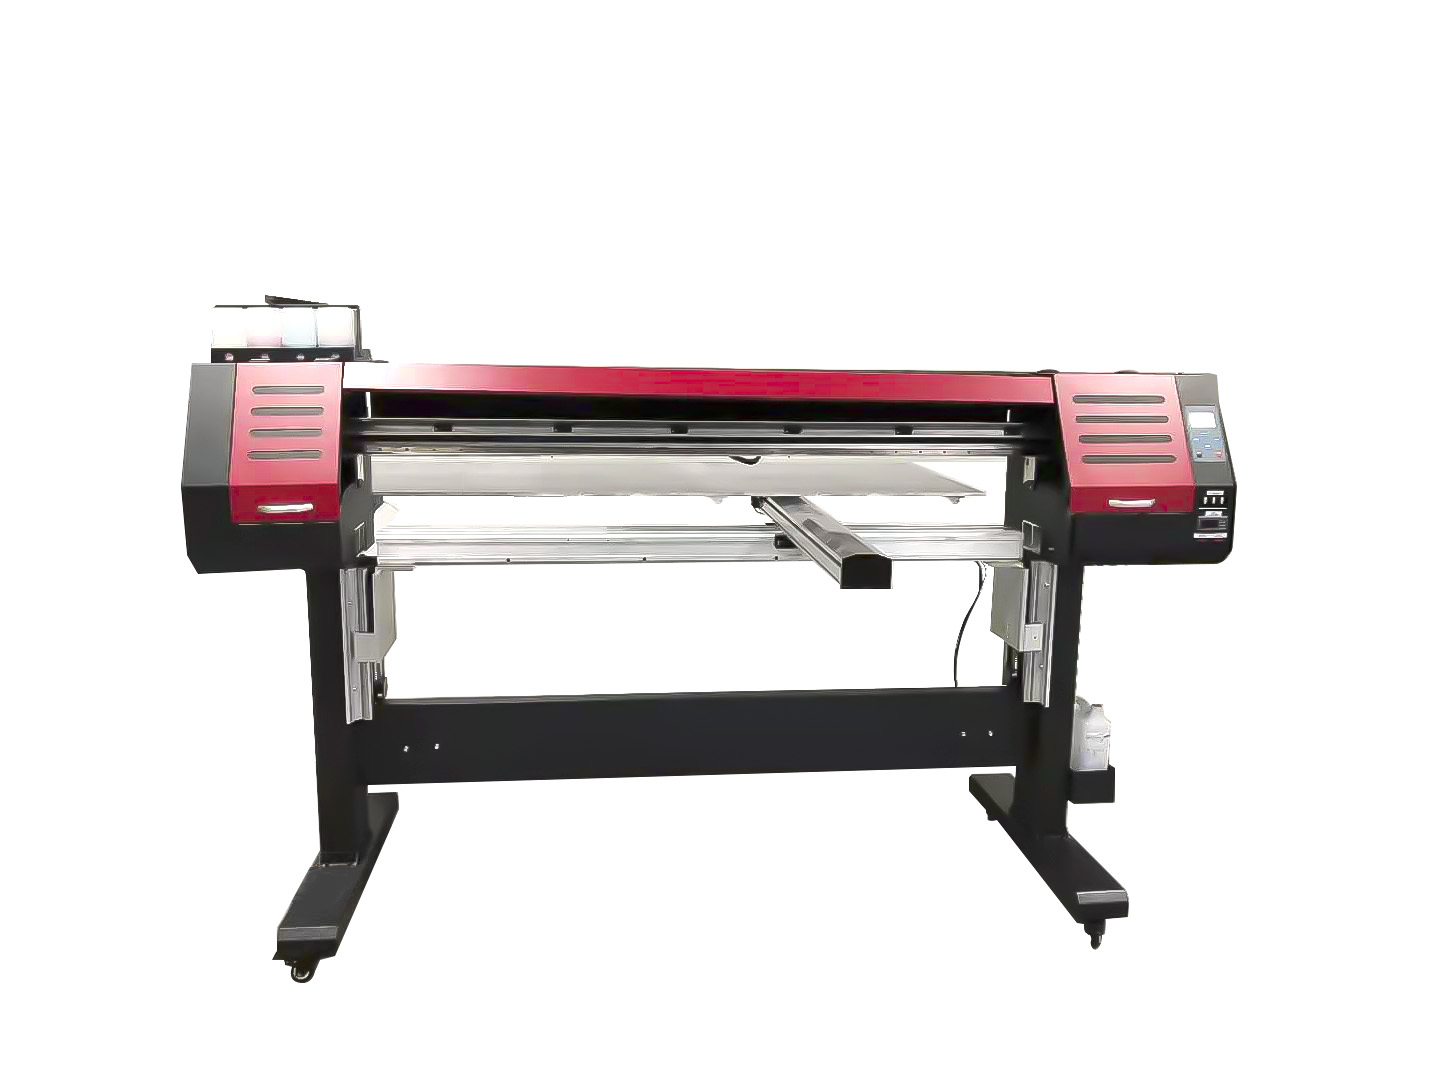 Why is the FP-B0+ Flatbed Food Printer Loved by the Baking Enterprises?